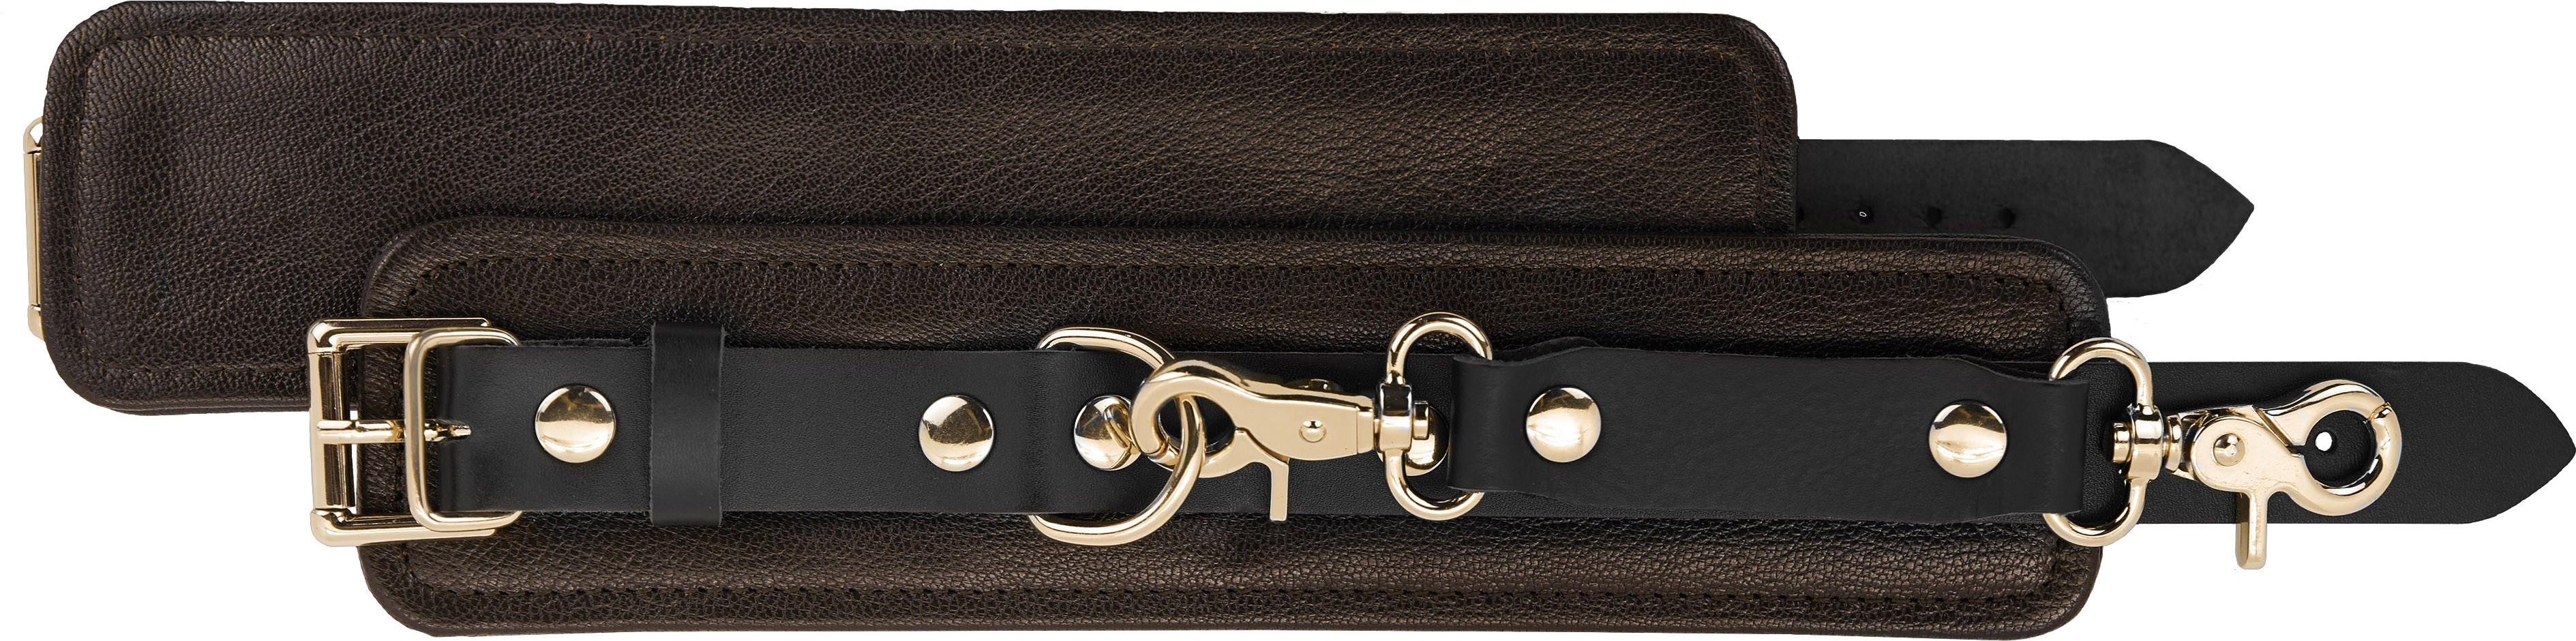 Wrist Restraints-Brown Leather with Gold Accent hardware